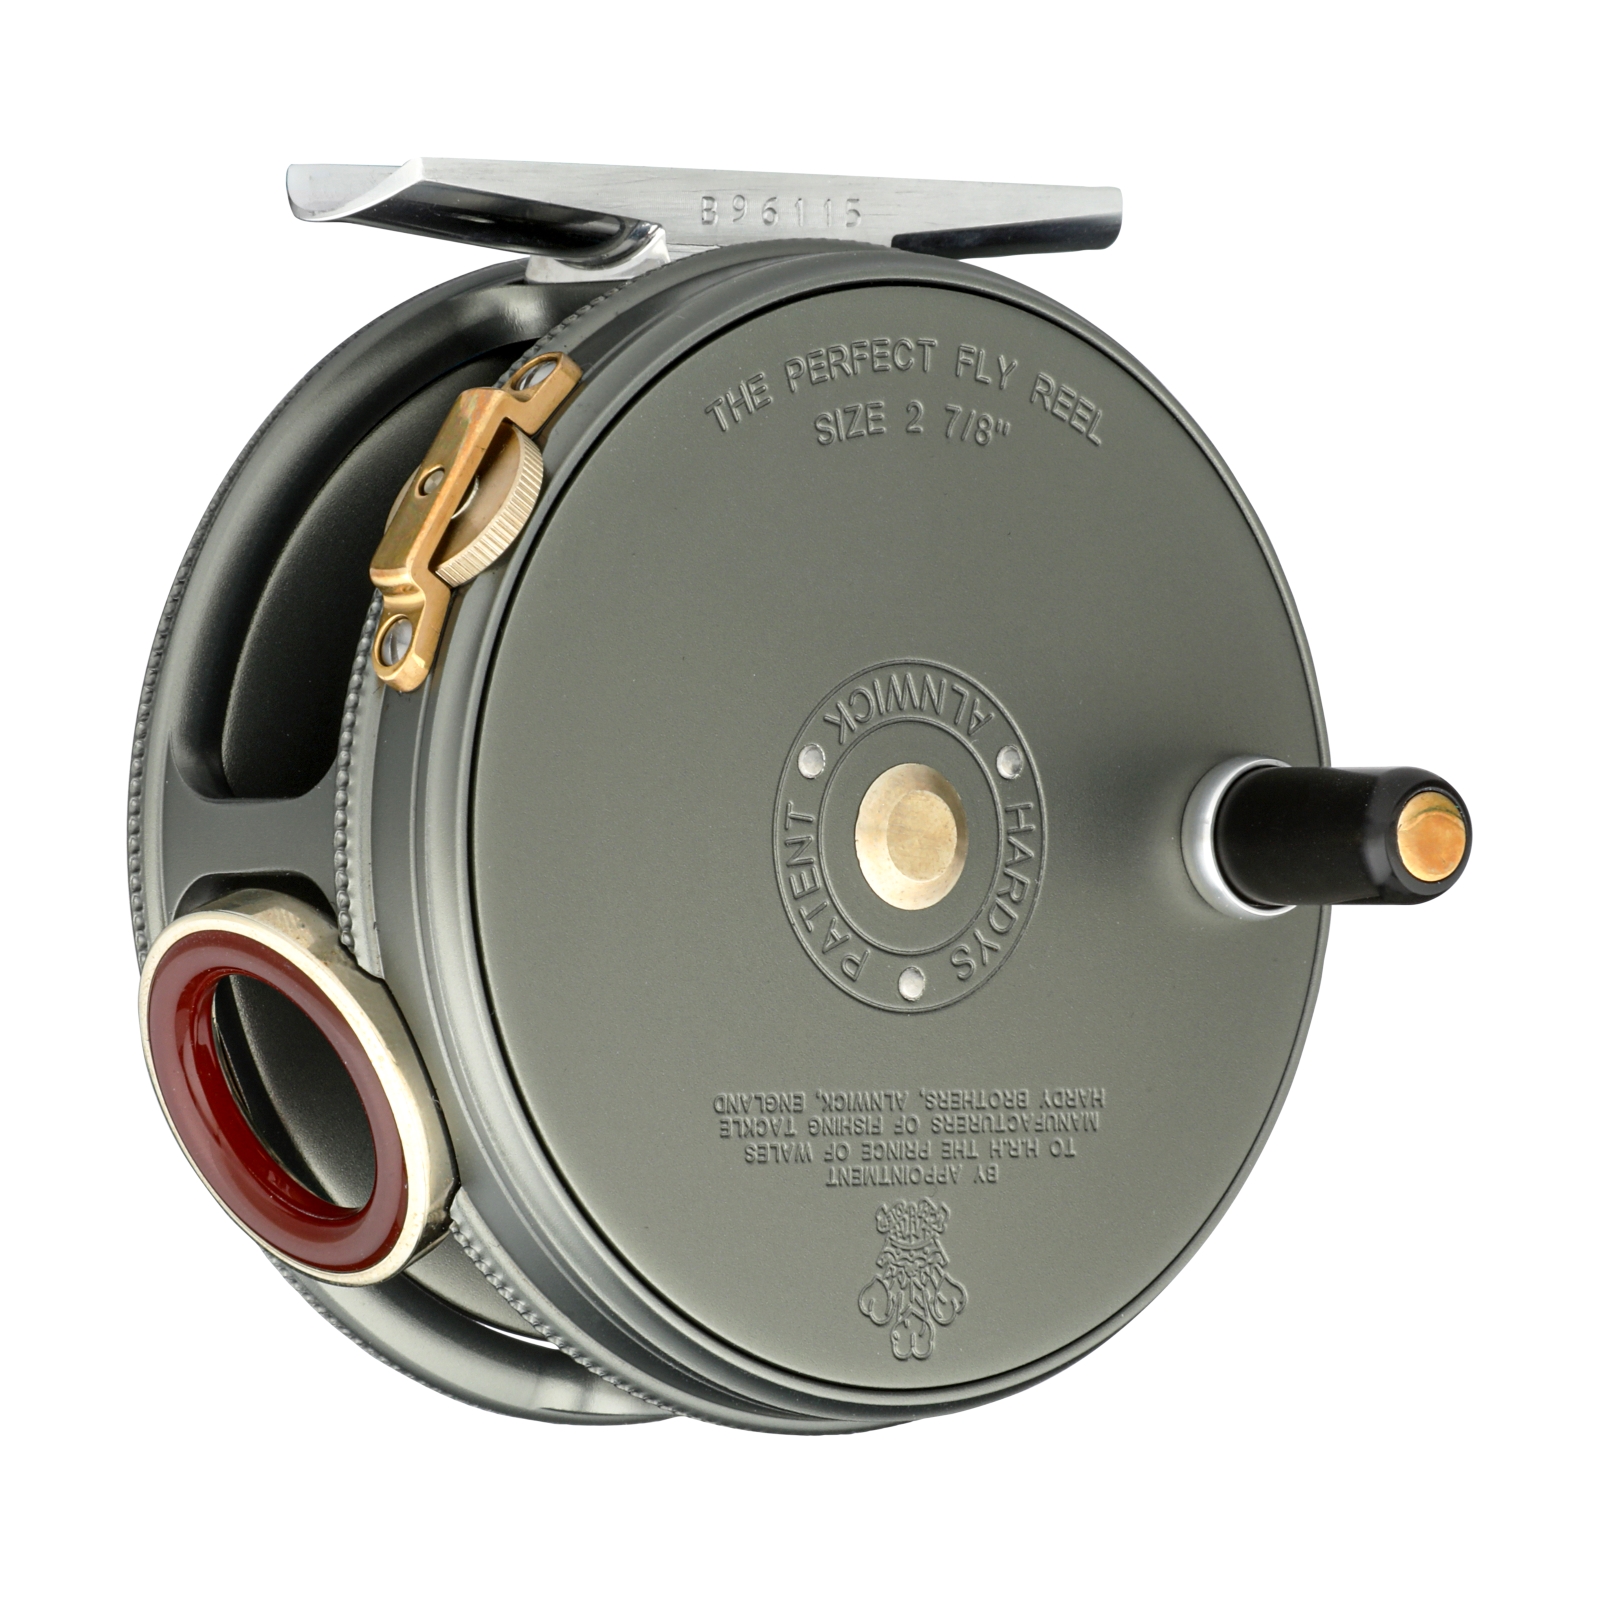 The Hardy 1912 Perfect Fly Reel: Steeped in History, General Discussions